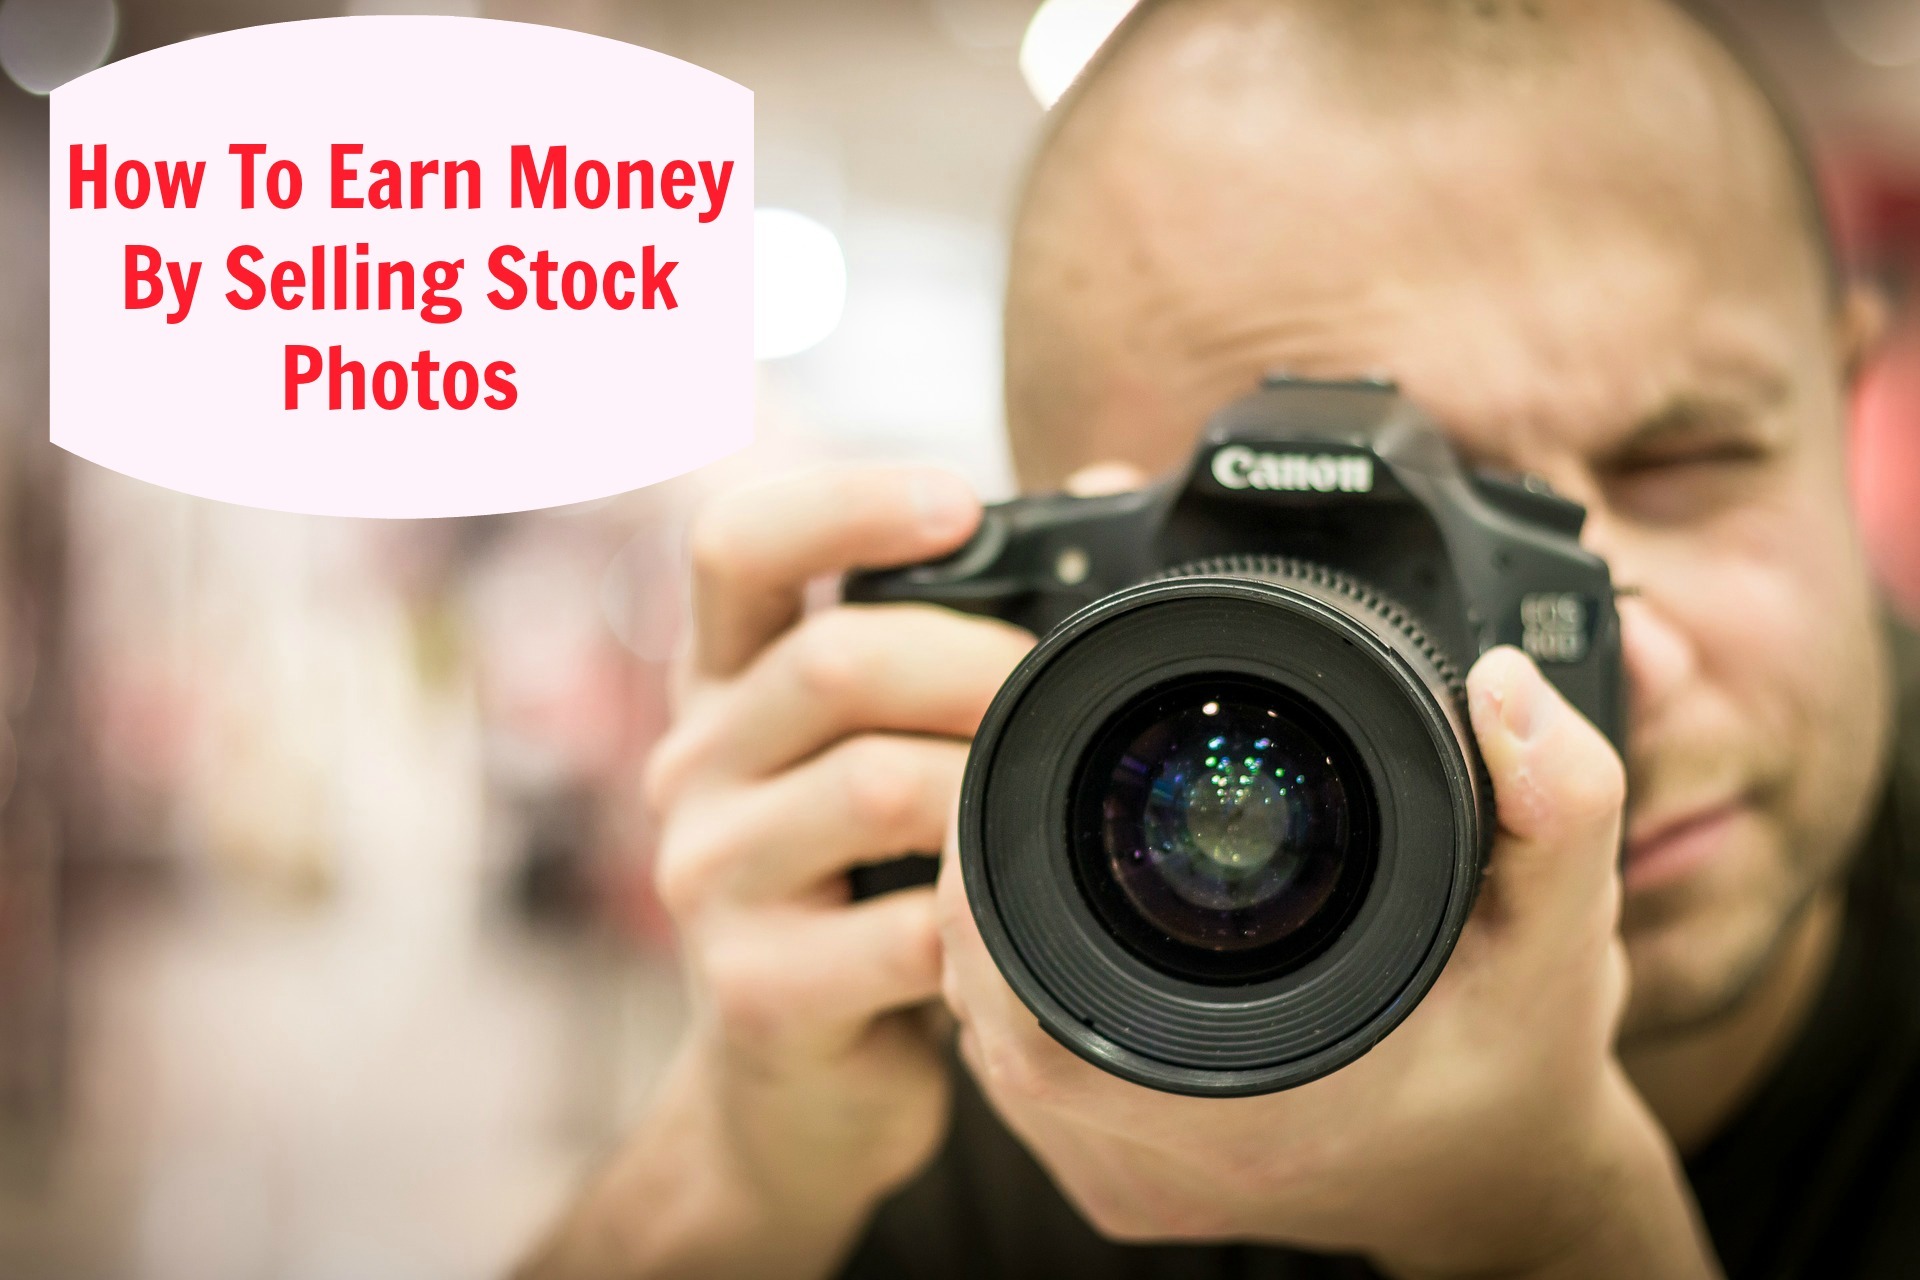 How To Earn Money By Selling Stock Photos